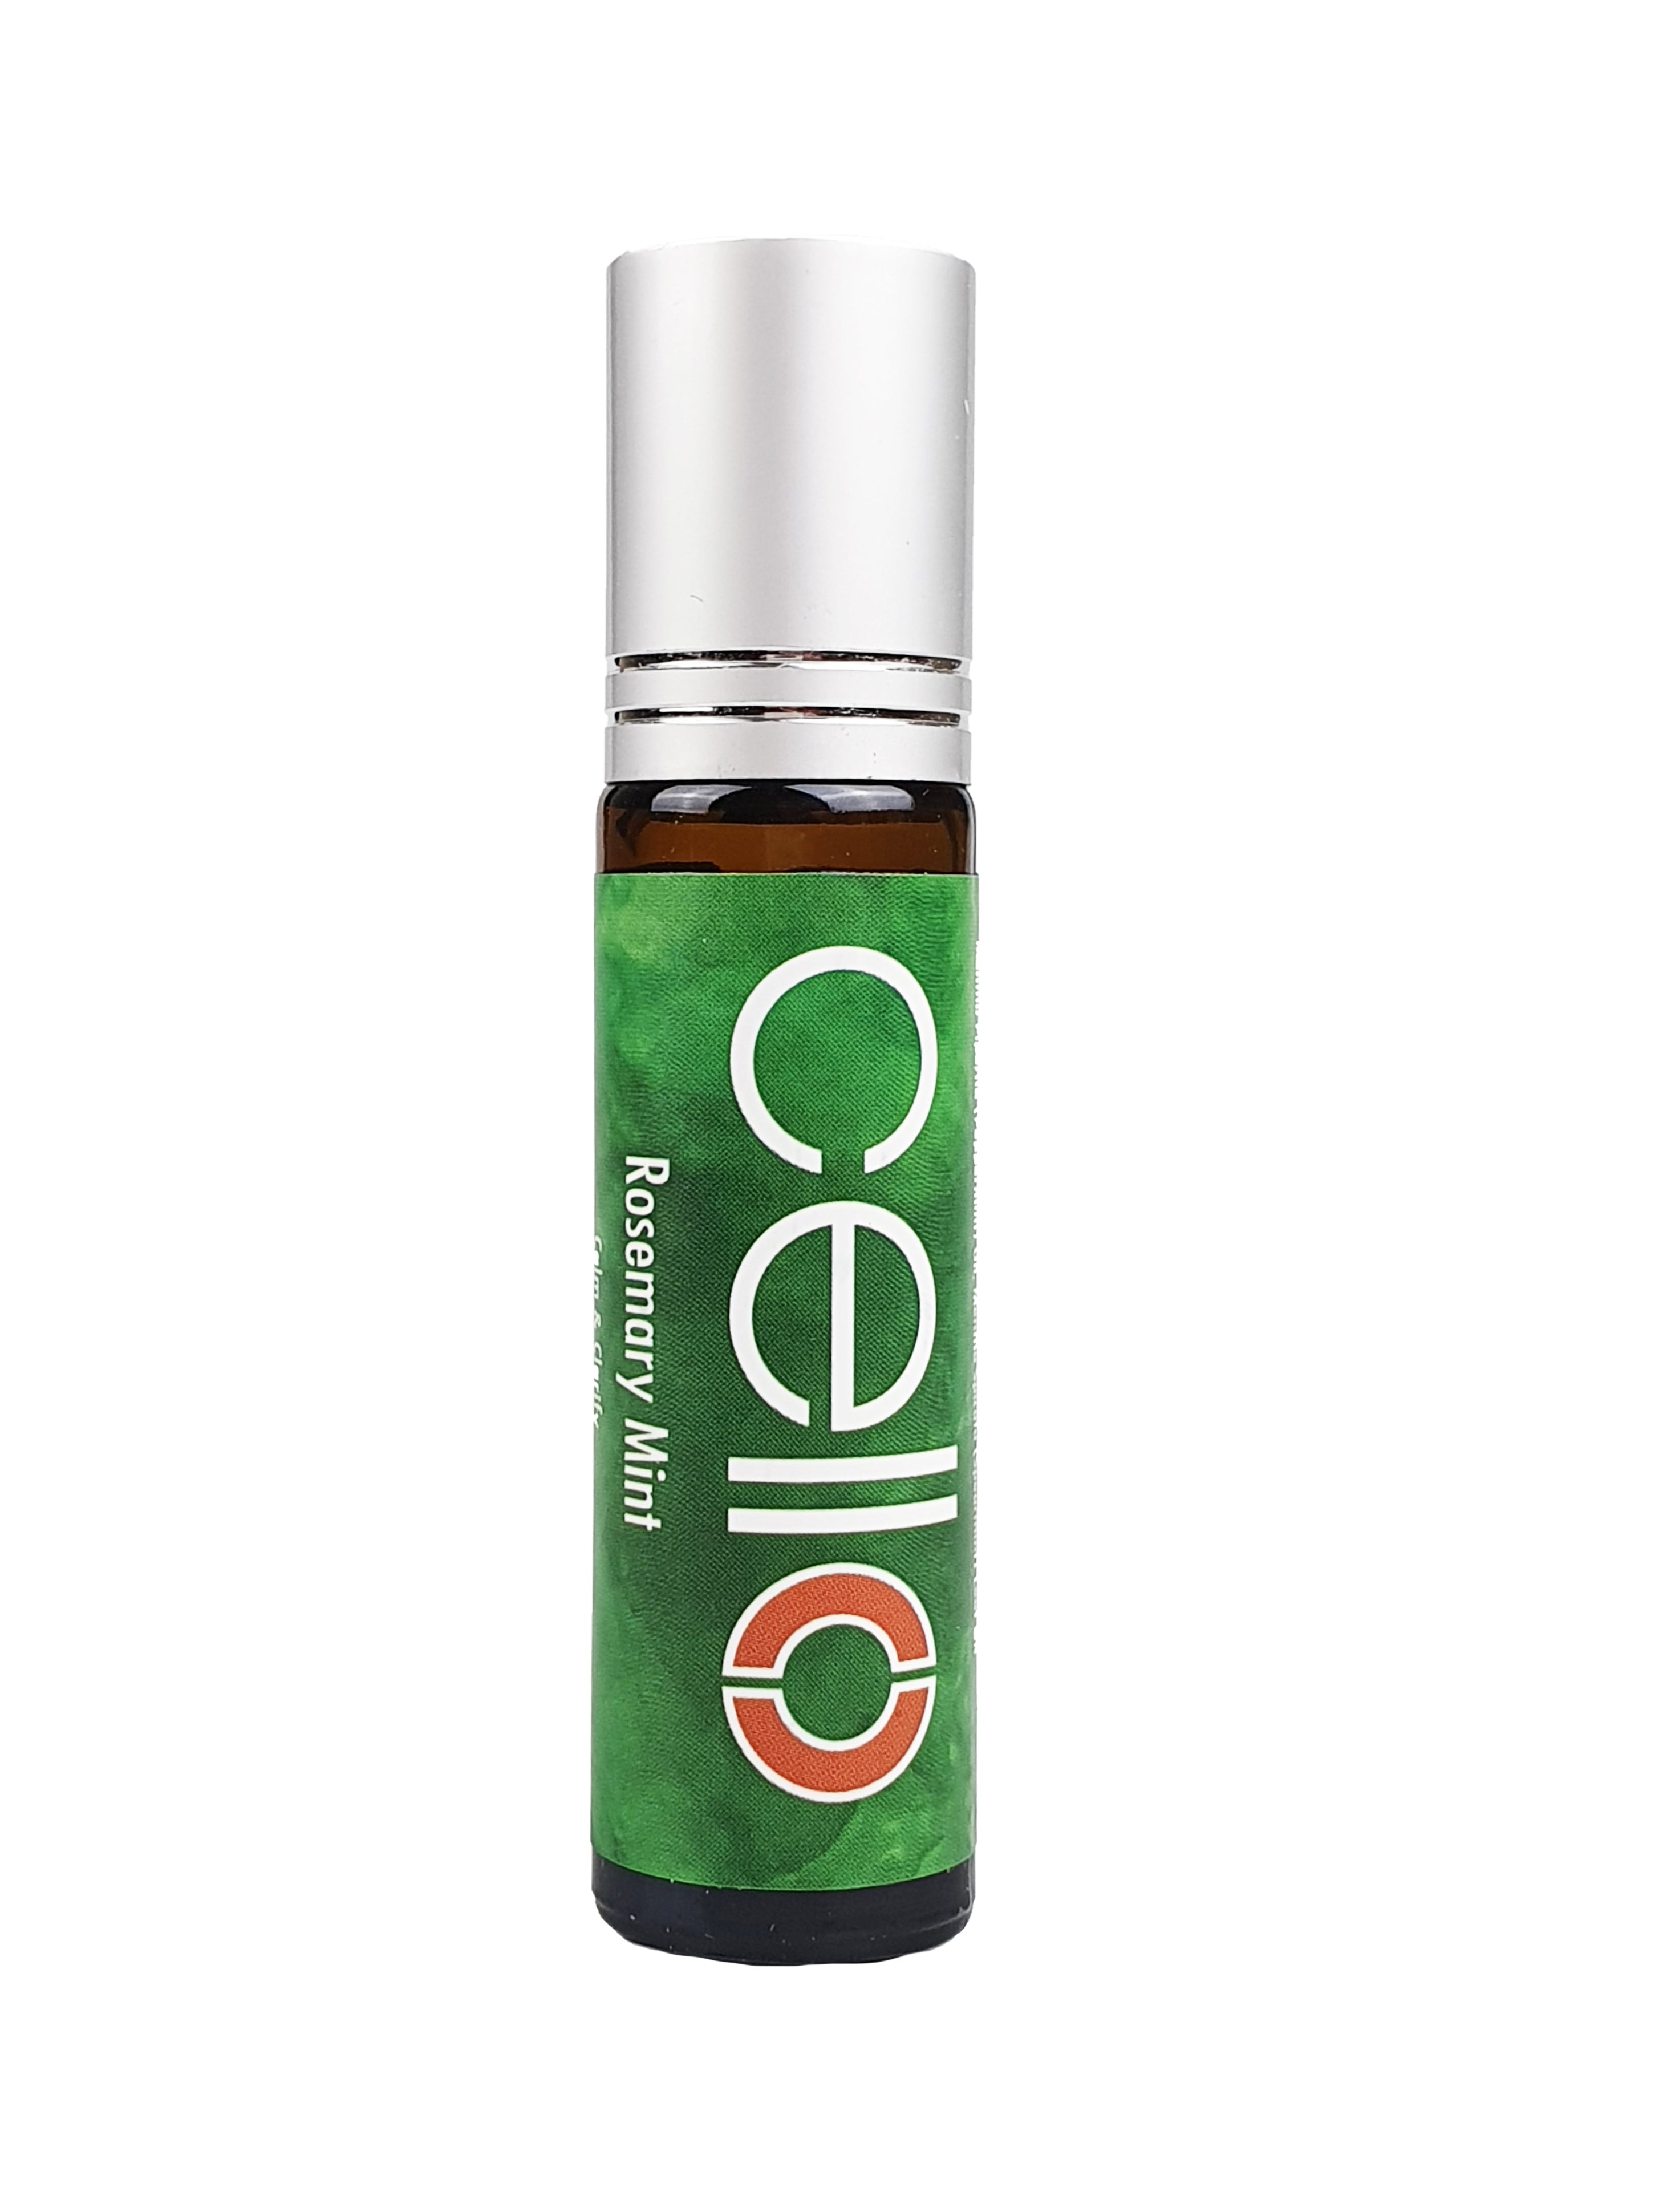 Cello - Rosemary Mint Roll On Natural Essential Oil 8.8ml